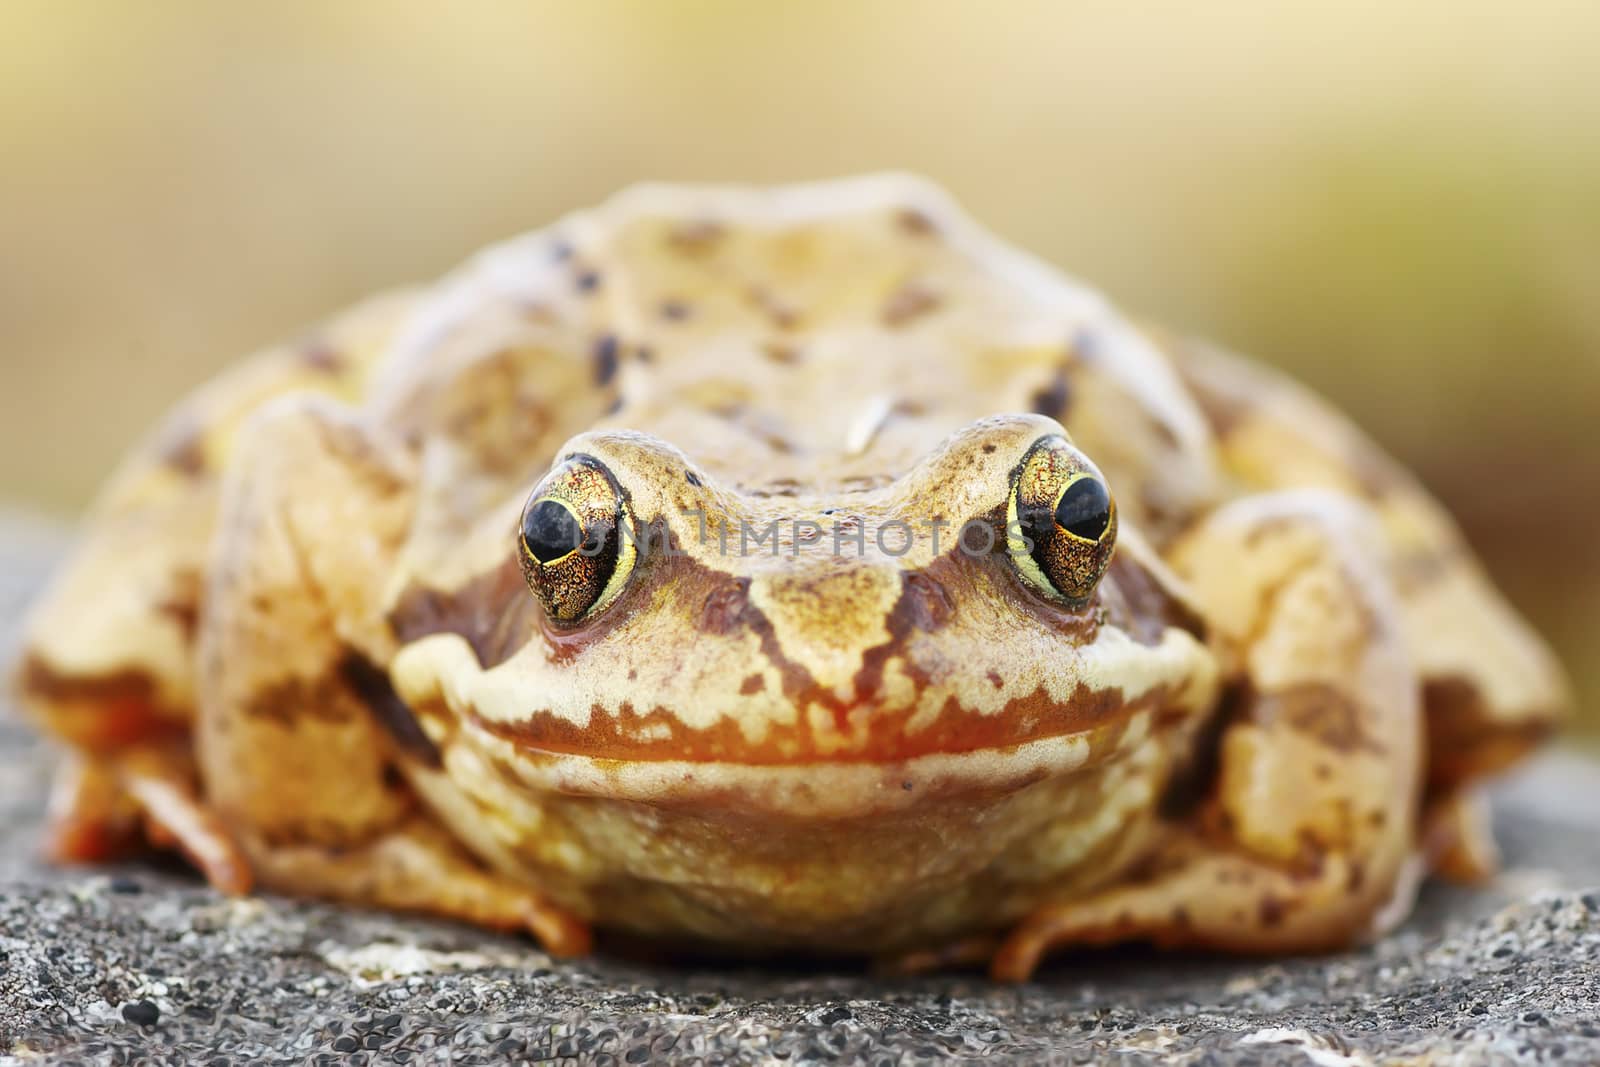 Rana temporaria portrait, abstract view of european common brown frog